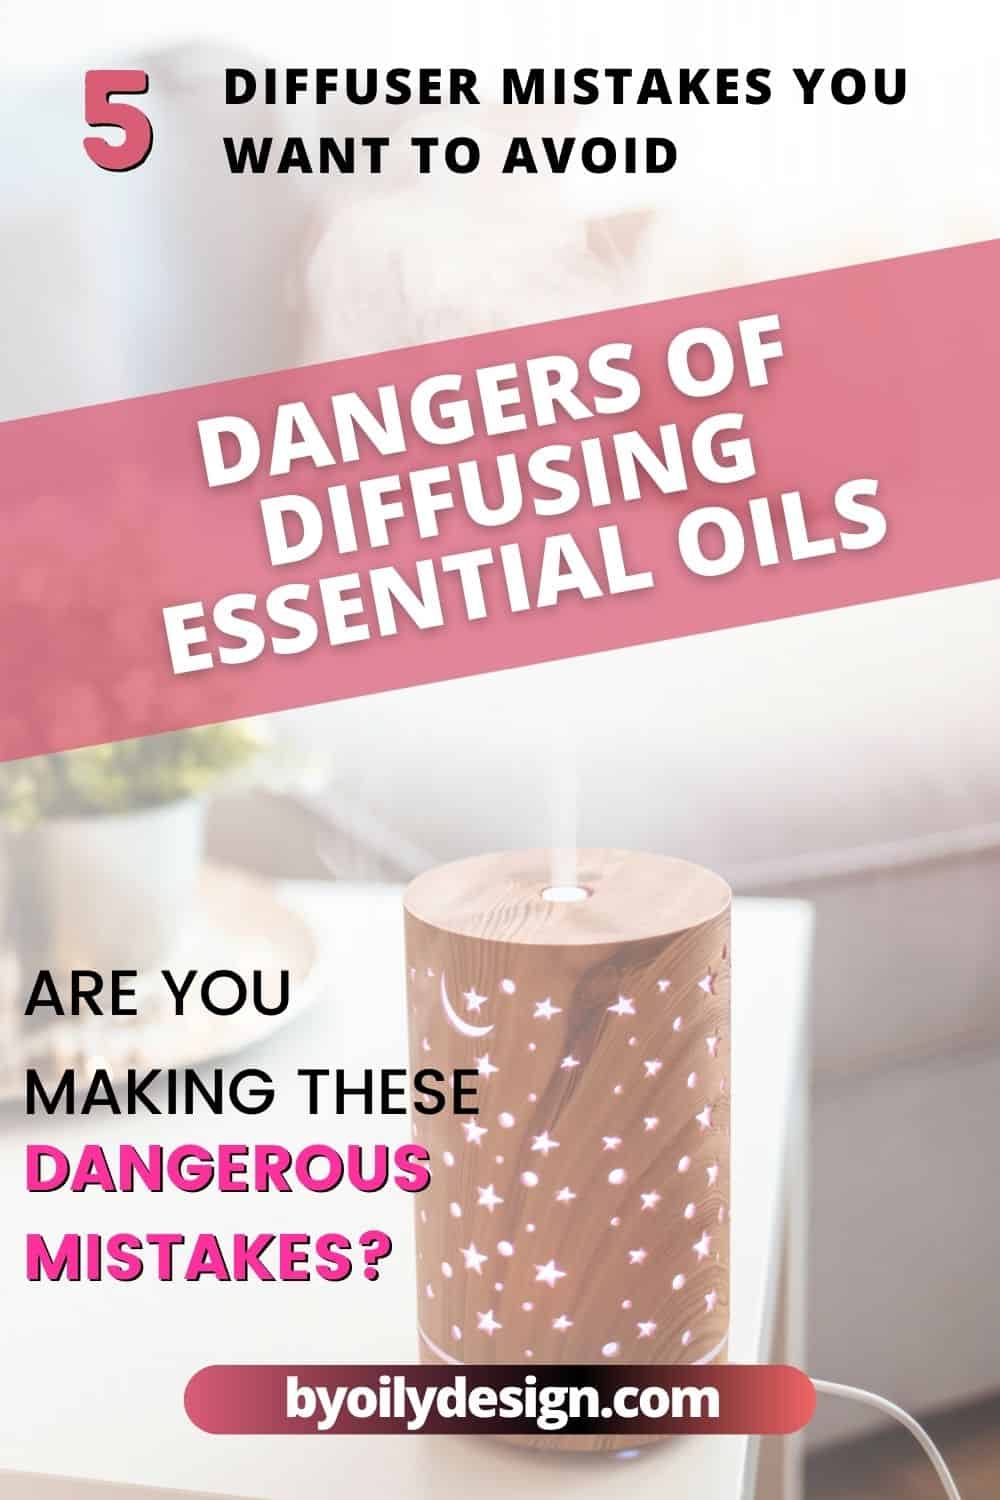 Risks and Dangers of Essential Oils